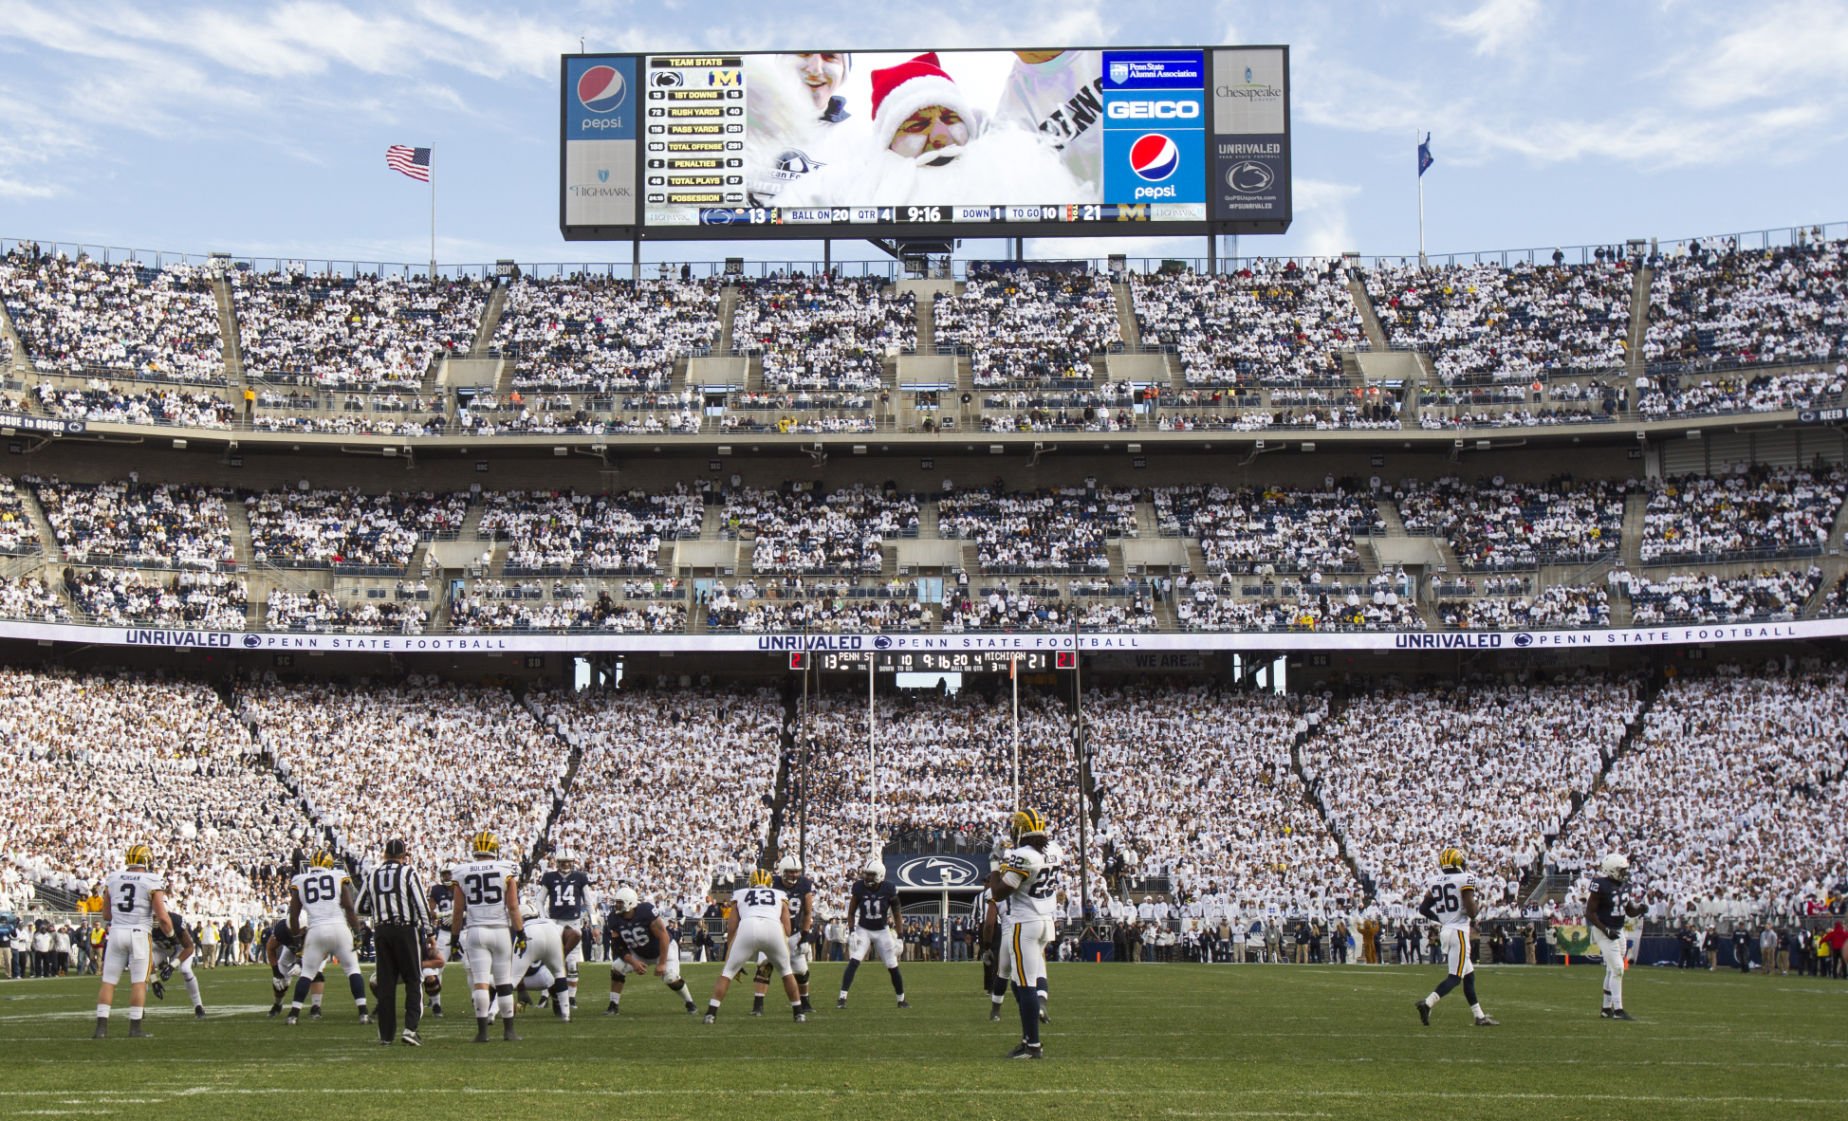 meaning of penn state white out game